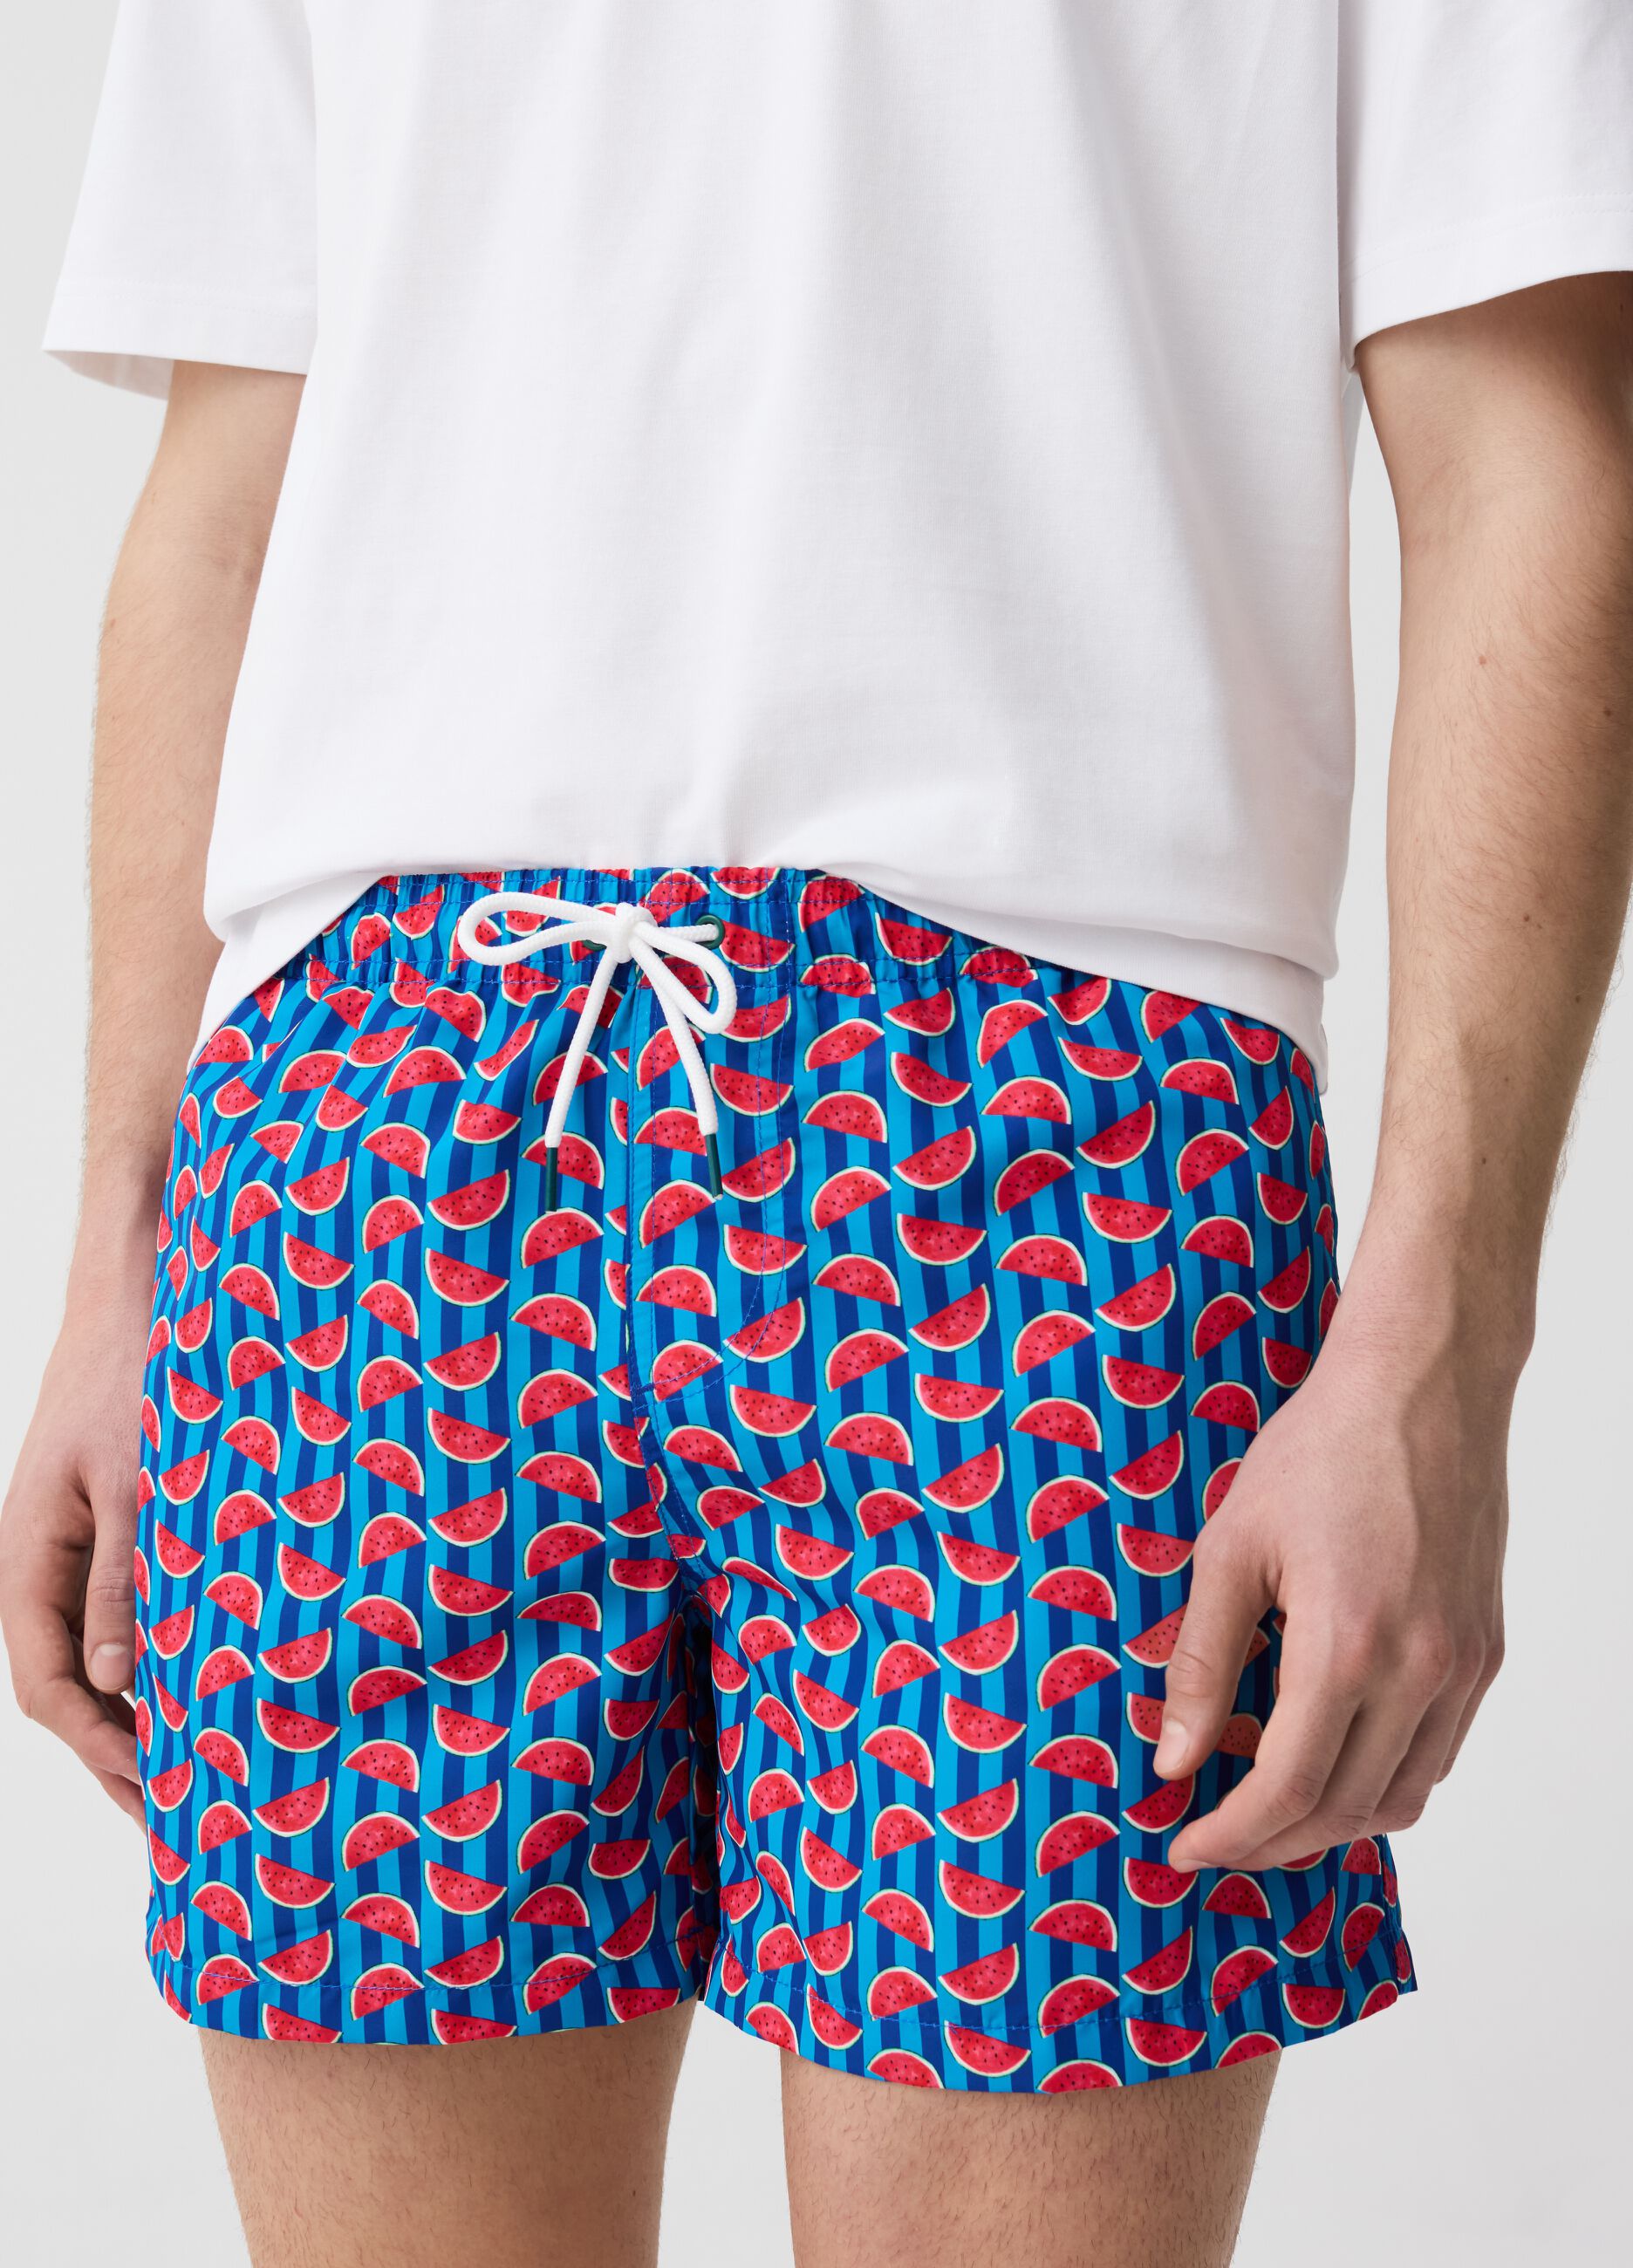 Striped swimming trunks with watermelon print